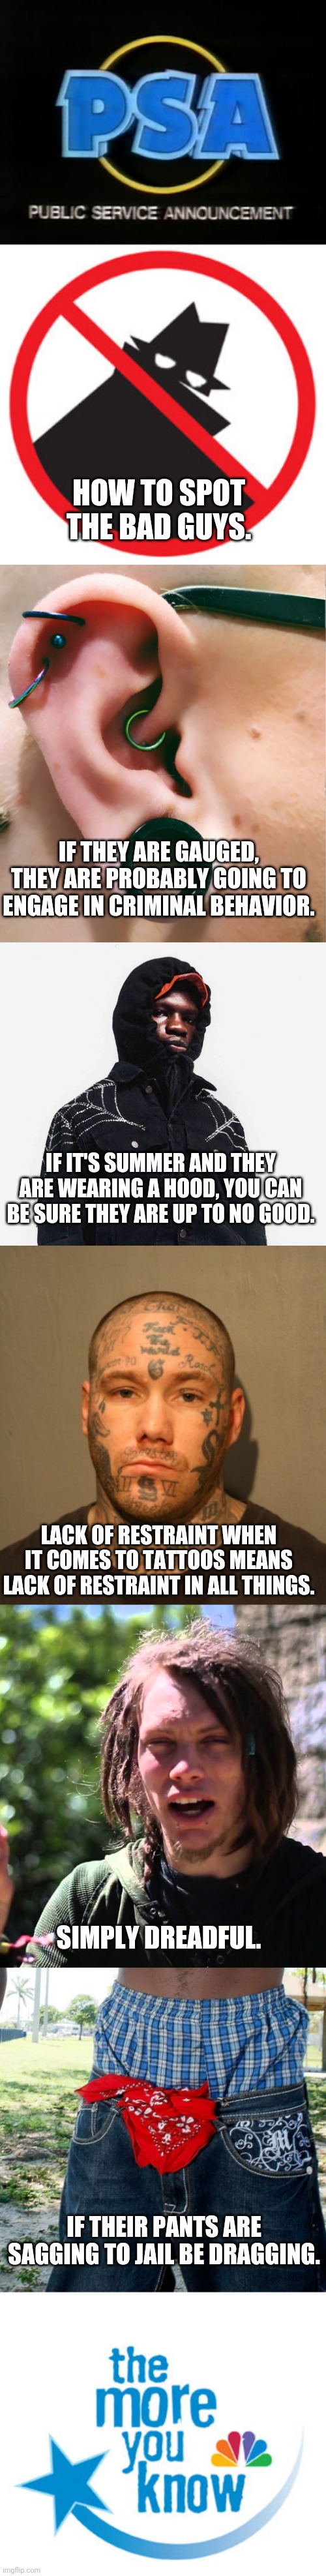 How to spot the bad guys. A public service meme. | HOW TO SPOT THE BAD GUYS. IF THEY ARE GAUGED, THEY ARE PROBABLY GOING TO ENGAGE IN CRIMINAL BEHAVIOR. IF IT'S SUMMER AND THEY ARE WEARING A HOOD, YOU CAN BE SURE THEY ARE UP TO NO GOOD. LACK OF RESTRAINT WHEN IT COMES TO TATTOOS MEANS LACK OF RESTRAINT IN ALL THINGS. SIMPLY DREADFUL. IF THEIR PANTS ARE SAGGING TO JAIL BE DRAGGING. | image tagged in thugs,criminals,public service announcement | made w/ Imgflip meme maker